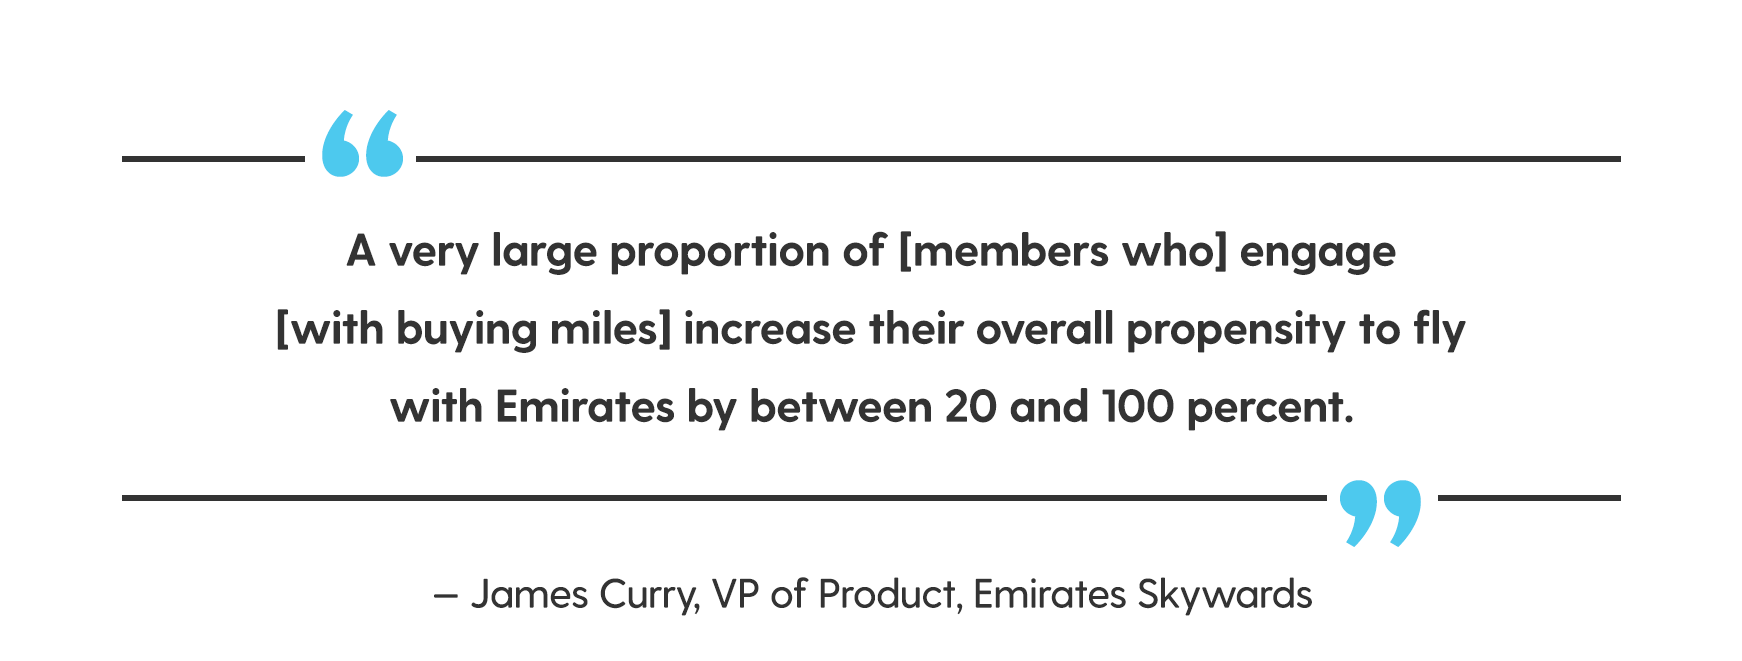 Quote from James Curry that reads, A very large proportion of members who engage with buying miles increase their overall propensity to fly with Emirates by between 20 and 100 percent.